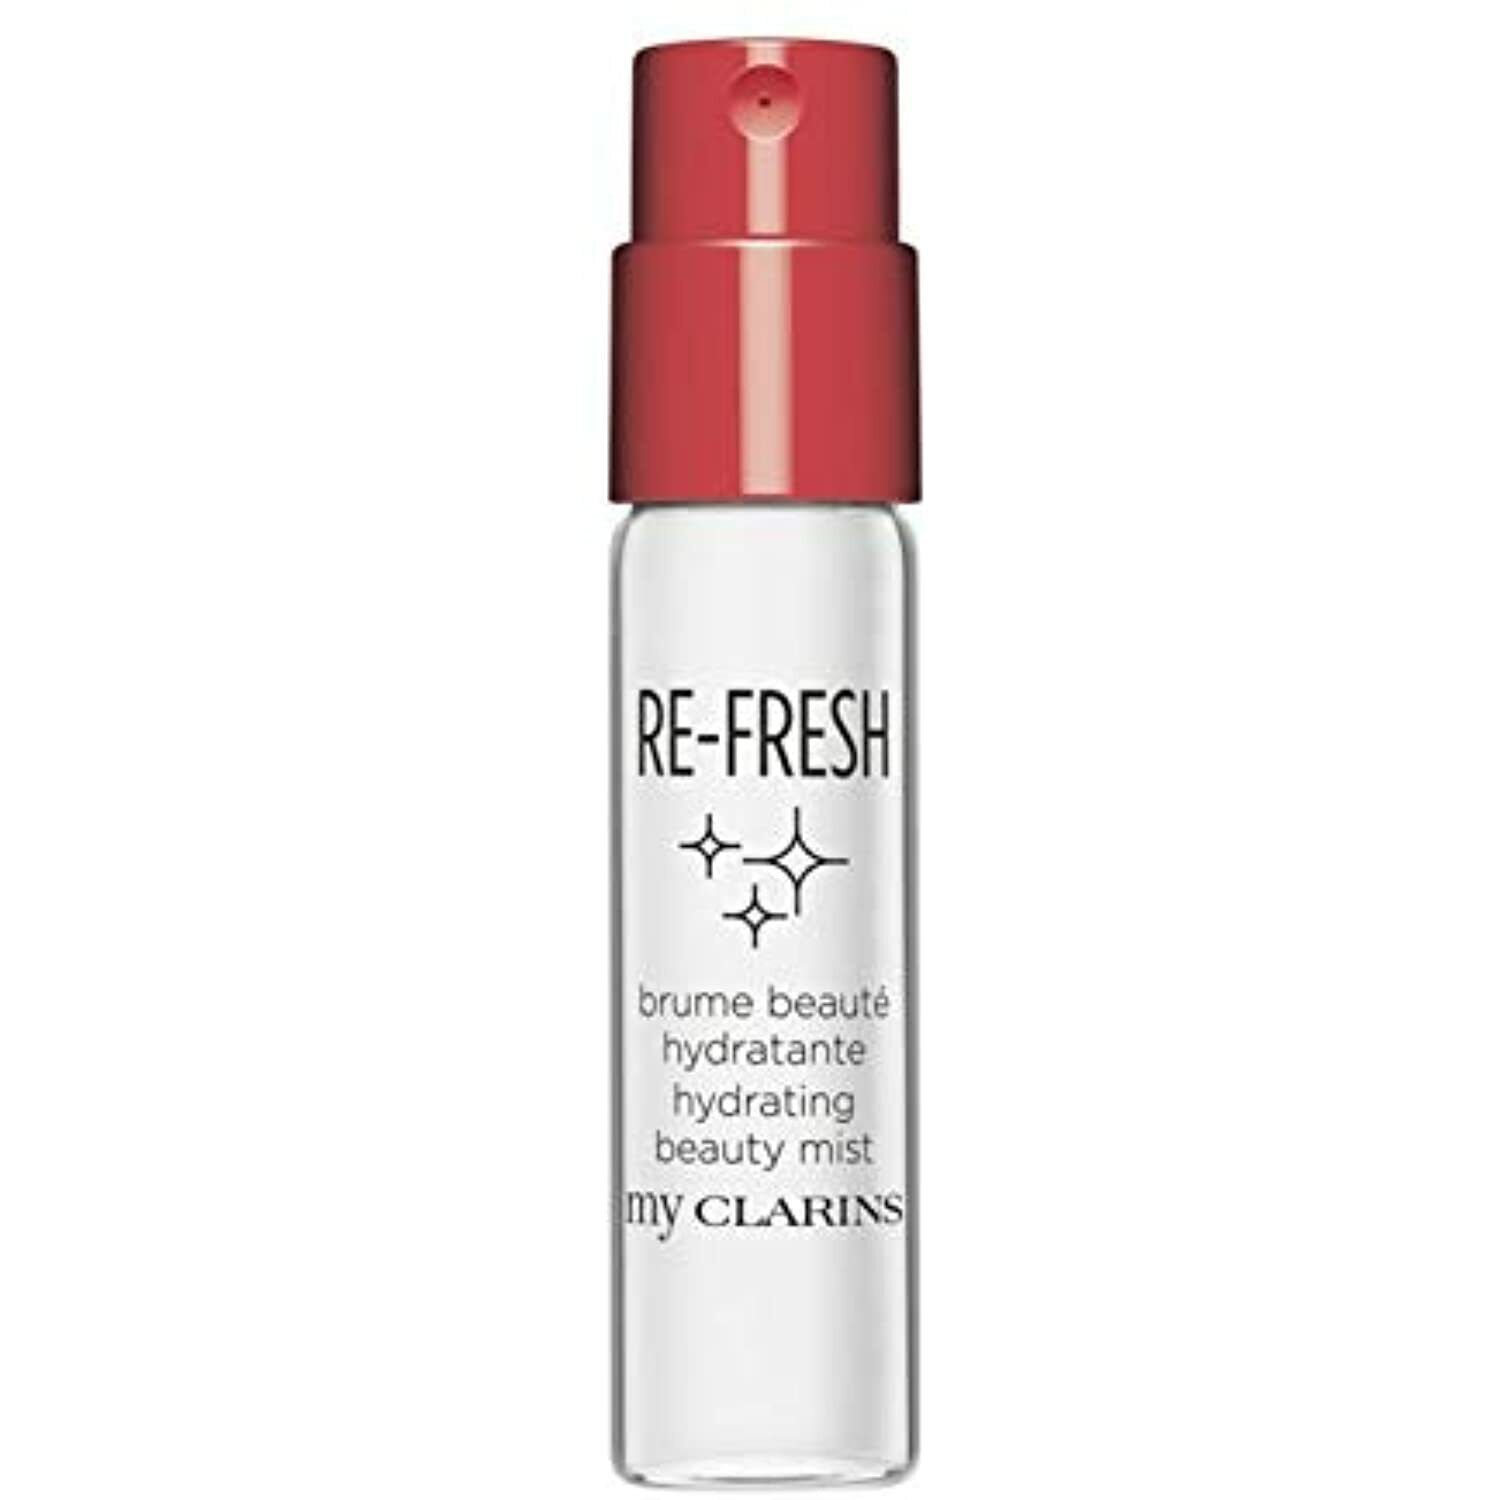 Primary image for My Clarins Re-Fresh Hydrating Beauty Mist, 0.05 fl oz / 1.5 ml, Travel Size Mini